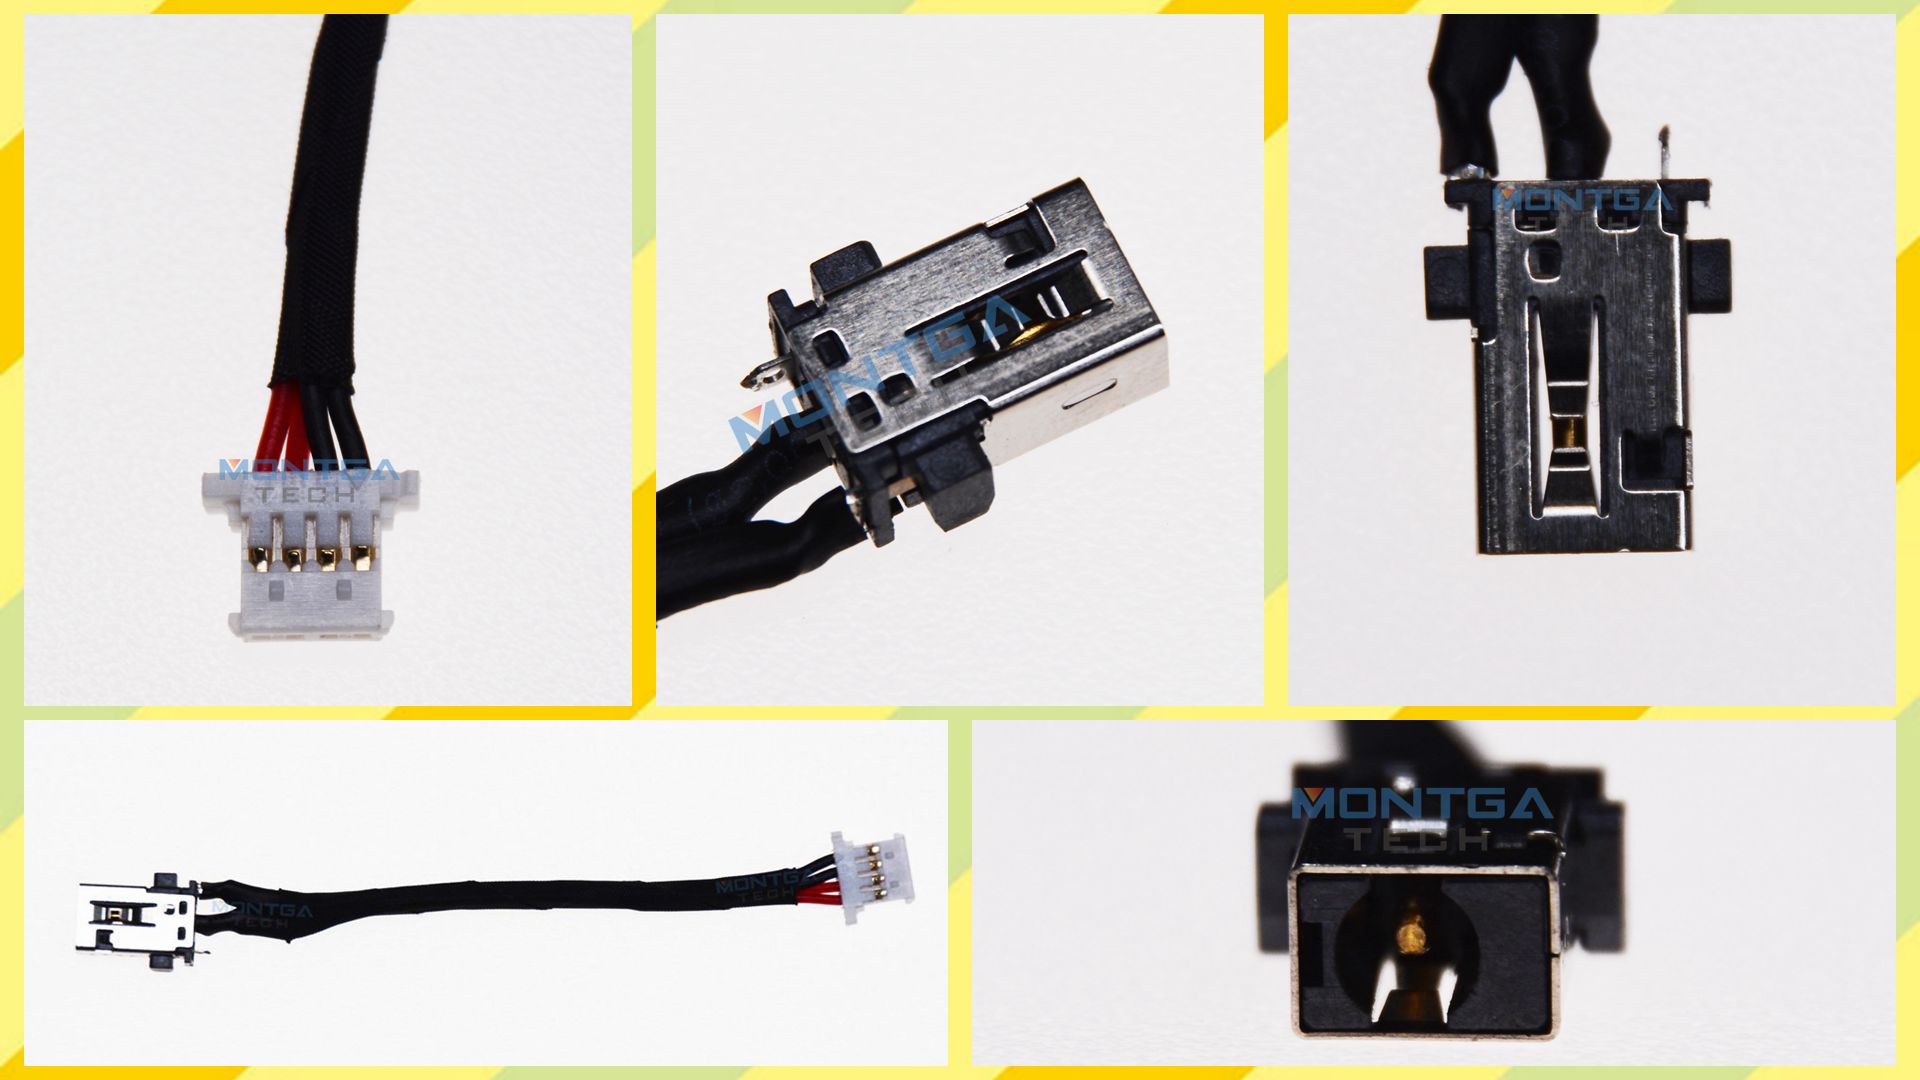 Acer SF314-51 charging connector, Acer SF314-51 DC Power Jack, Acer SF314-51 DC IN Cable, Acer SF314-51 Power Jack, Acer SF314-51 plug, Acer SF314-51 Jack socket, Acer SF314-51 connecteur de charge, 